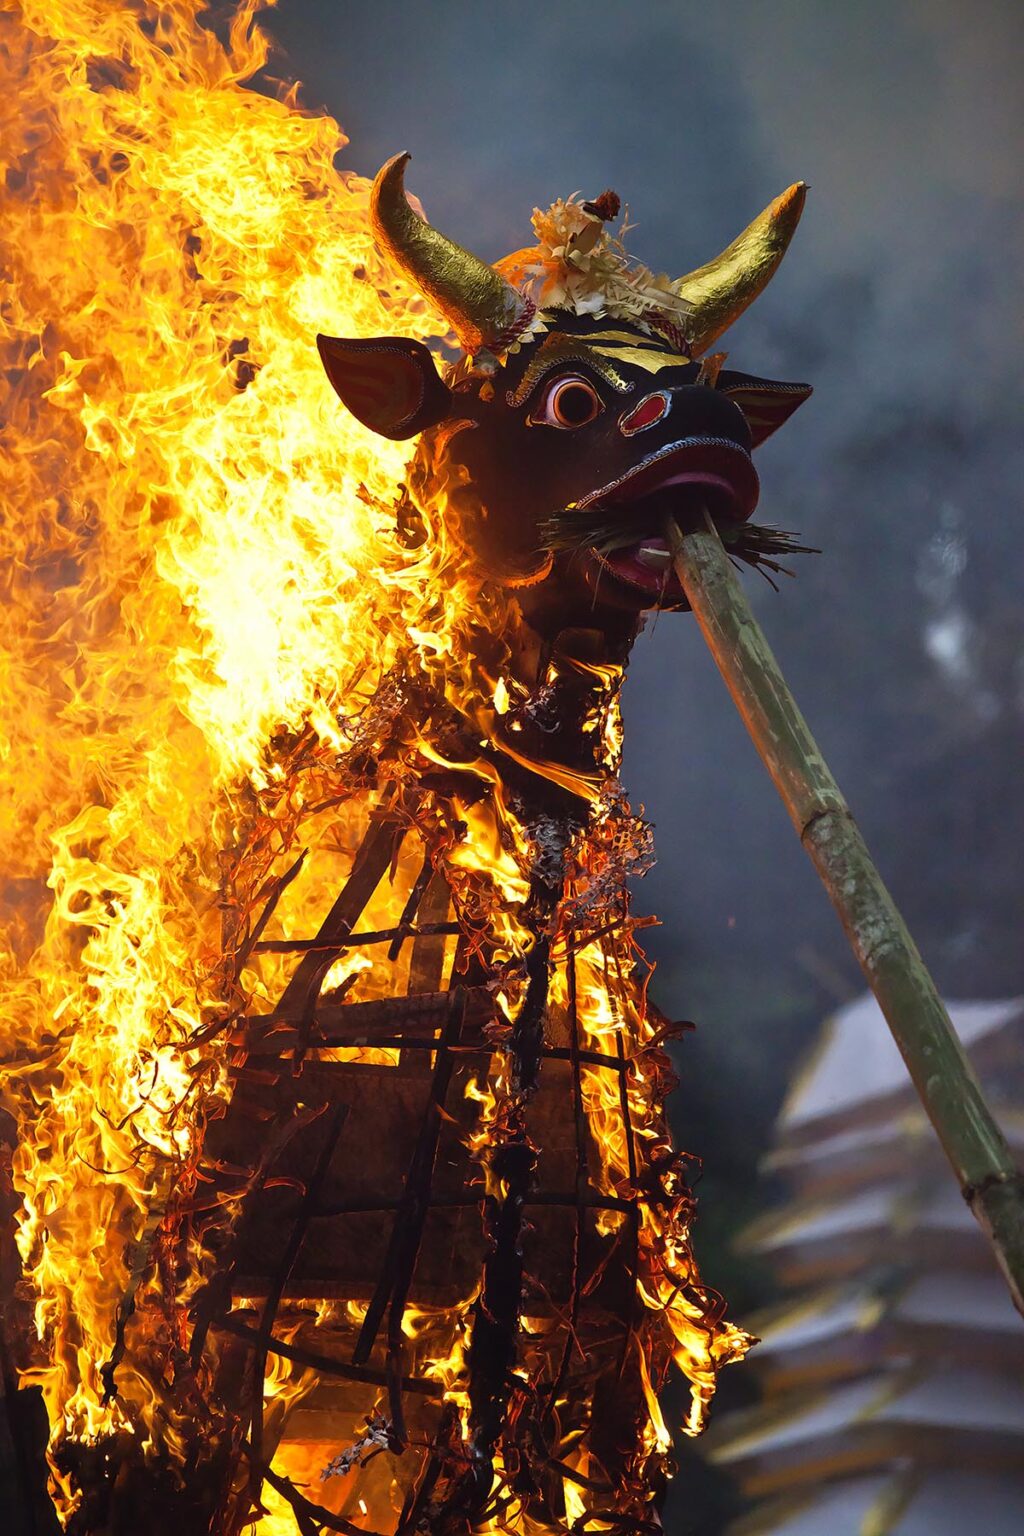 A Hindu style CREMATION where the dead body is burned inside a wooden bull - UBUD, BALI, INDONESIA